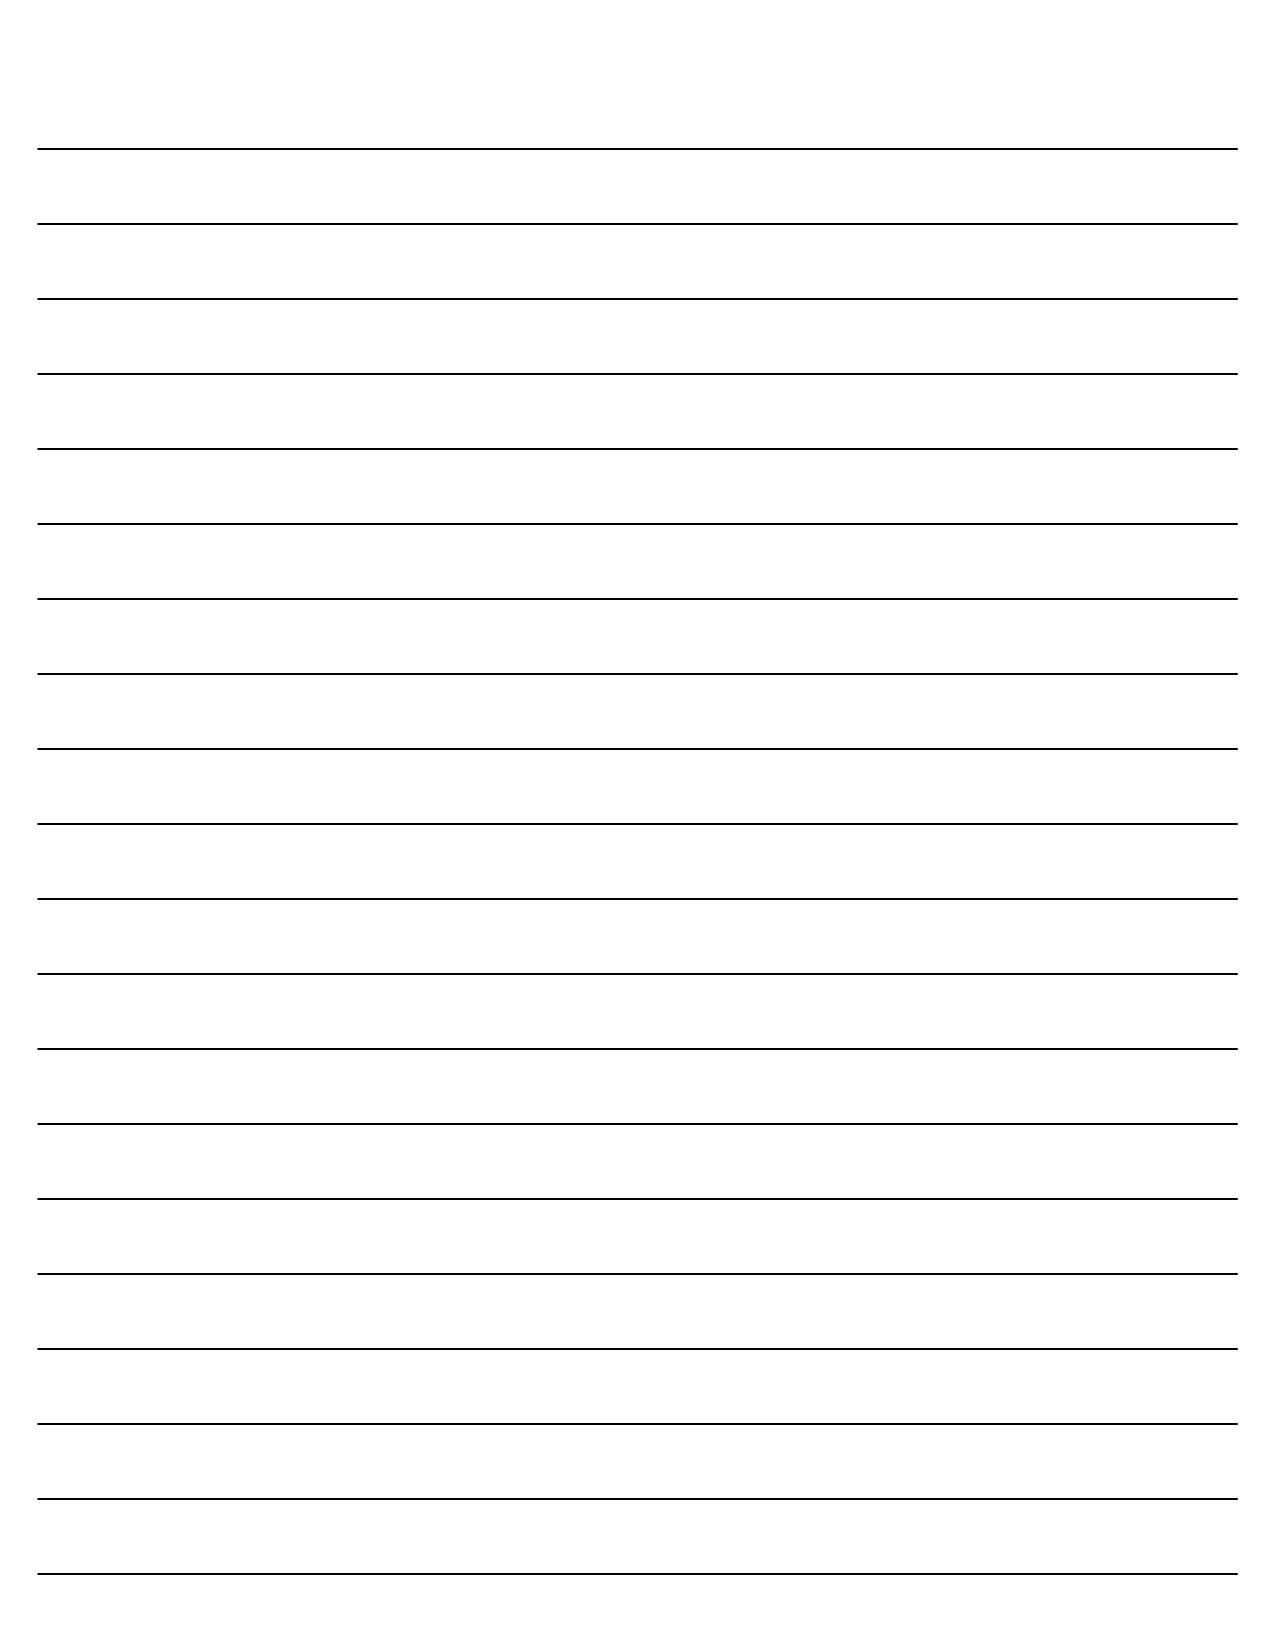 Free Printable Lined Writing Paper Template | Printables | Pinterest - Free Printable Lined Writing Paper